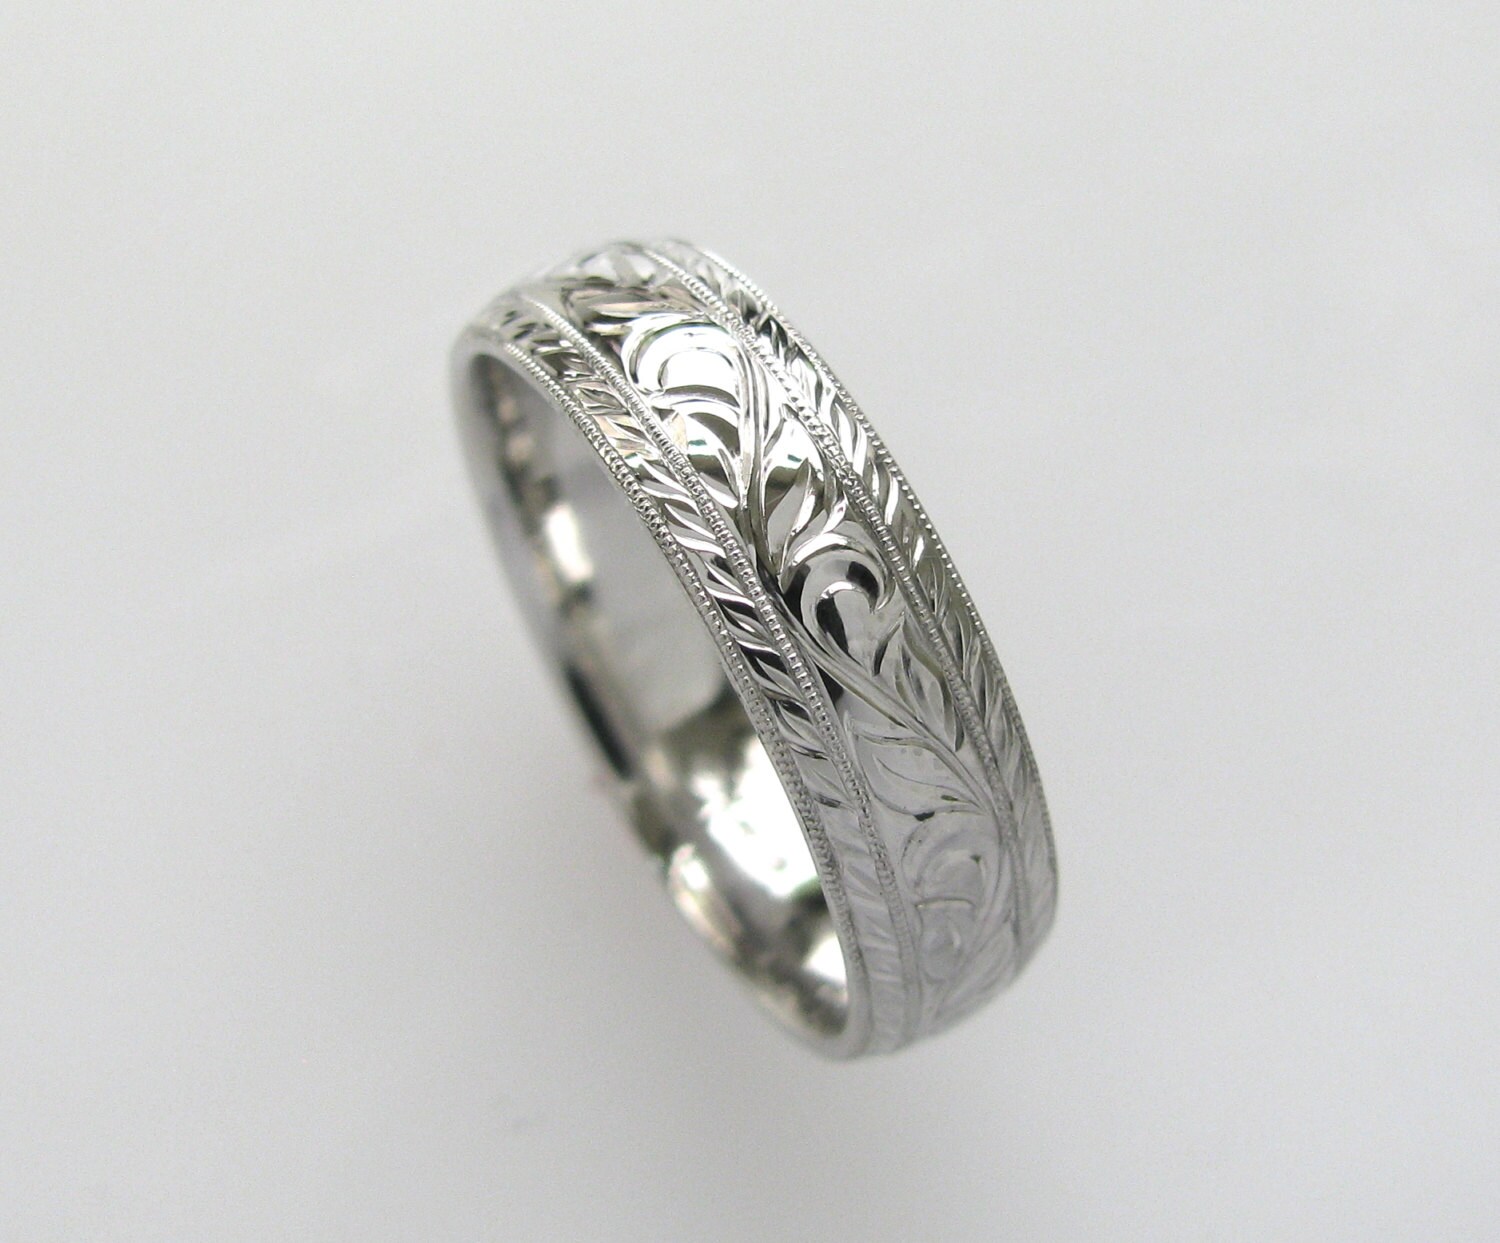 6mm Vine and Leaf Hand Engraved Wedding Band or Anniversary | Etsy